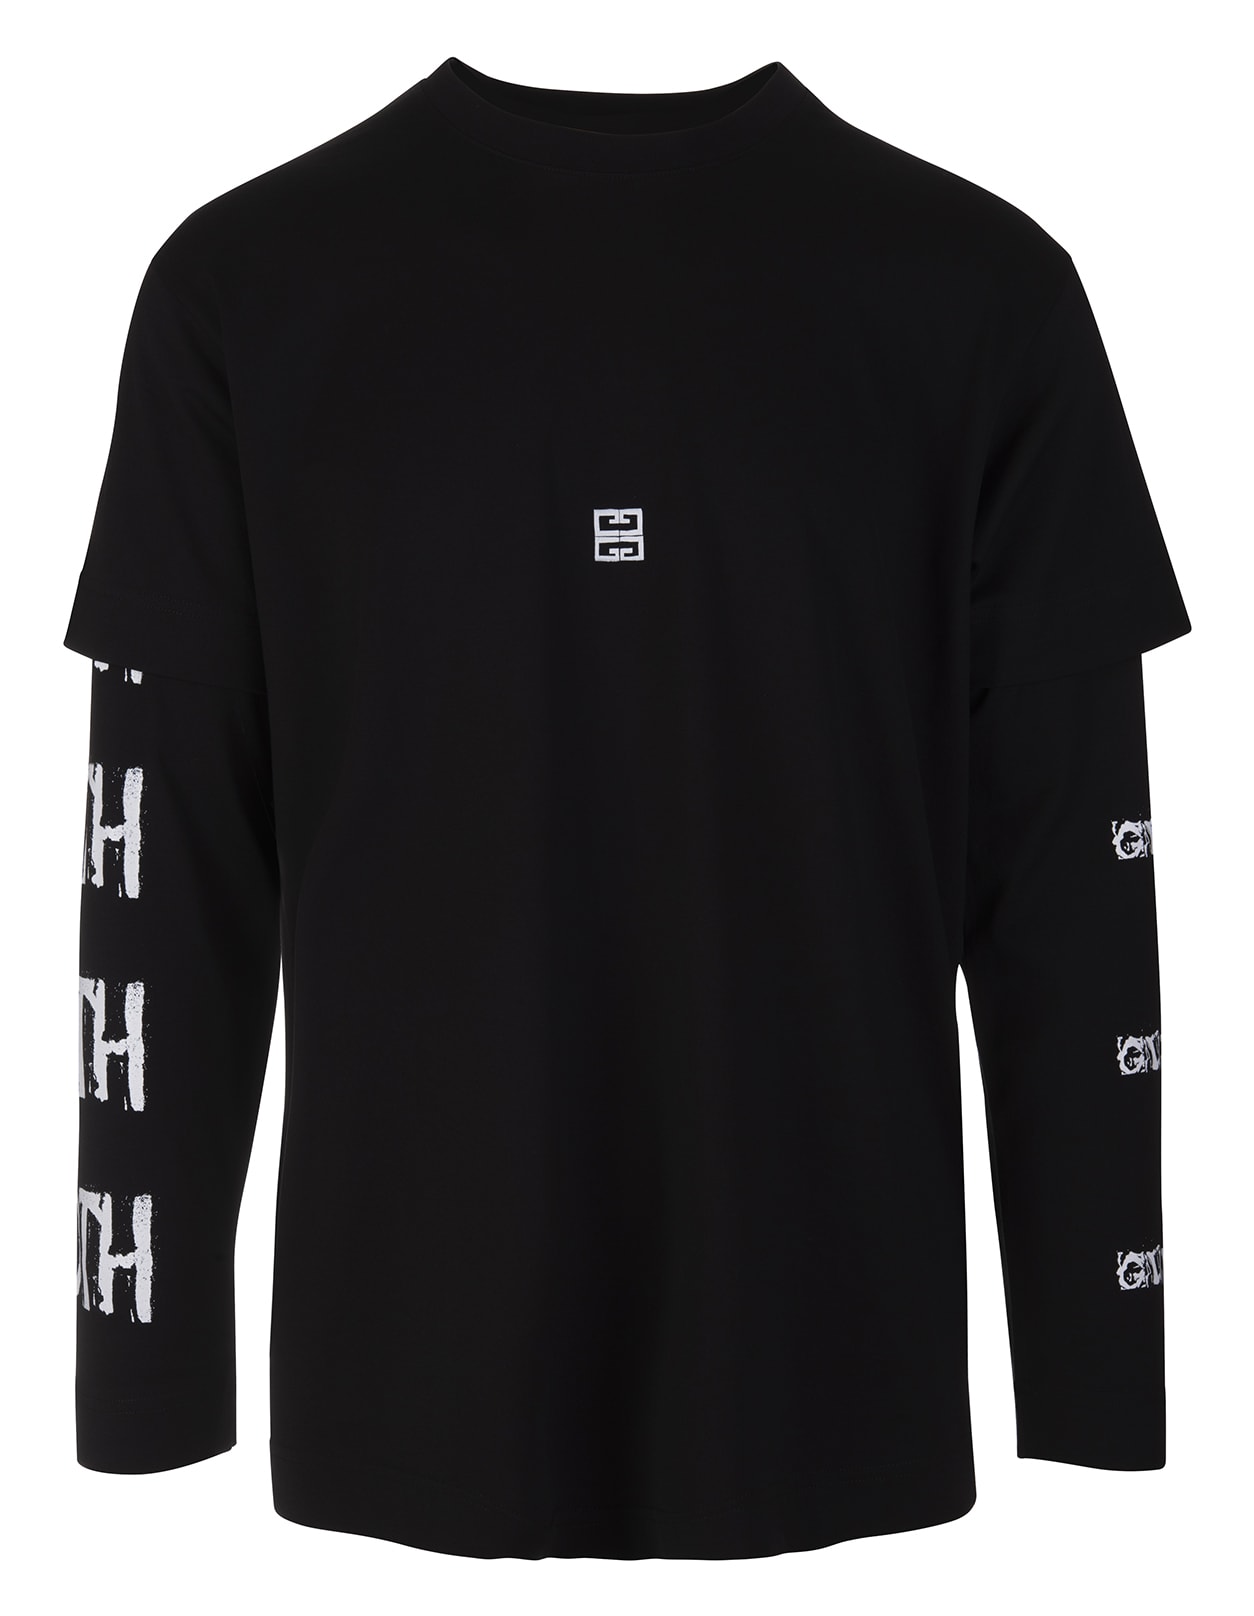 Givenchy Man Black T-shirt With Overlay Effect And Ceramique Print